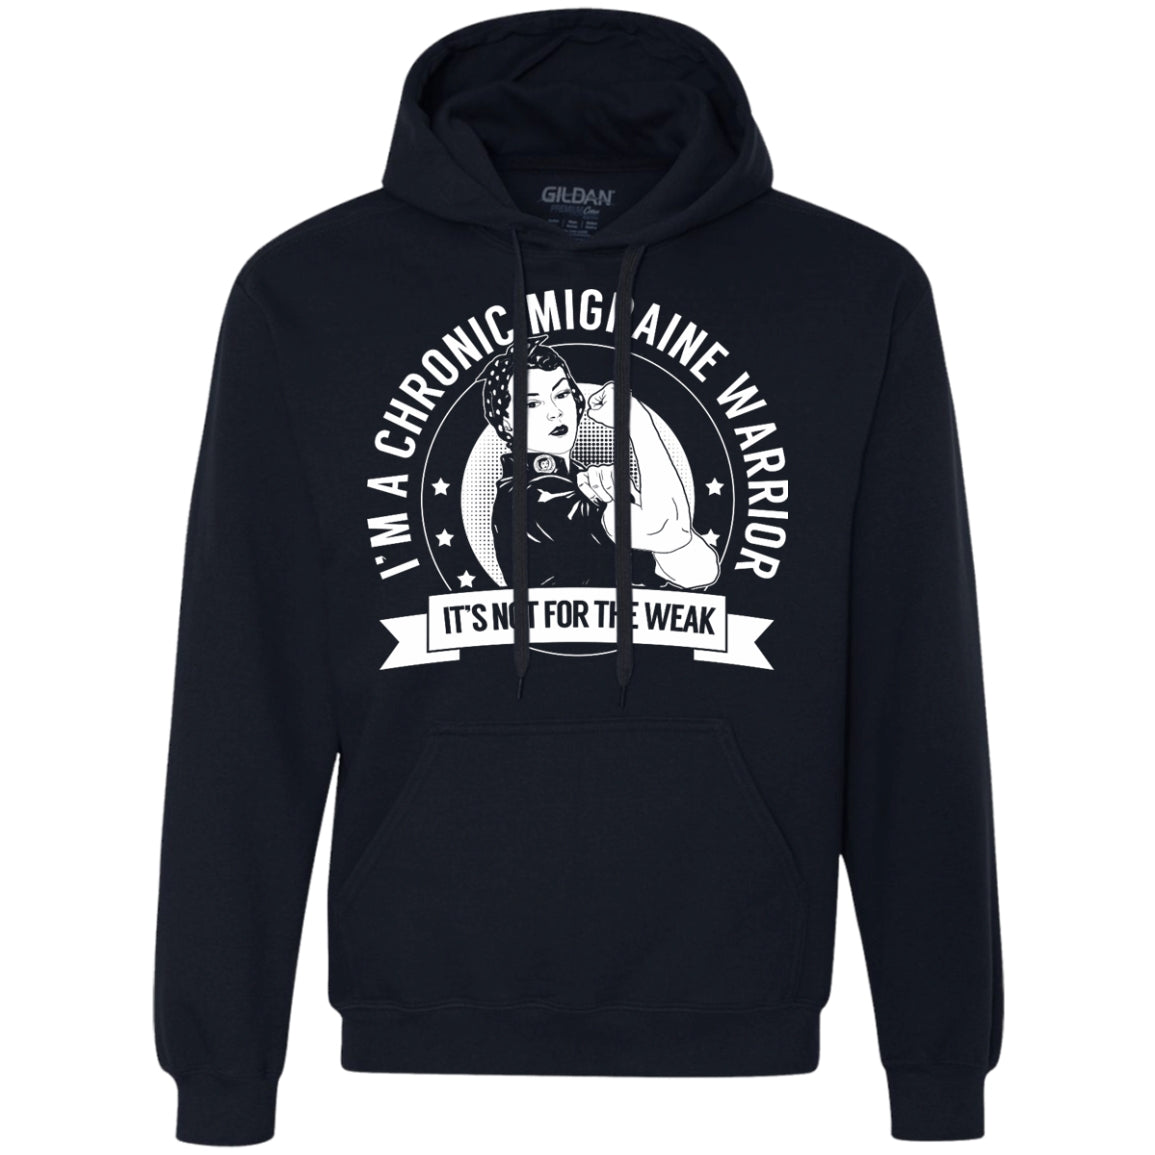 Chronic Migraine Warrior Not For The Weak Pullover Hoodie - The Unchargeables